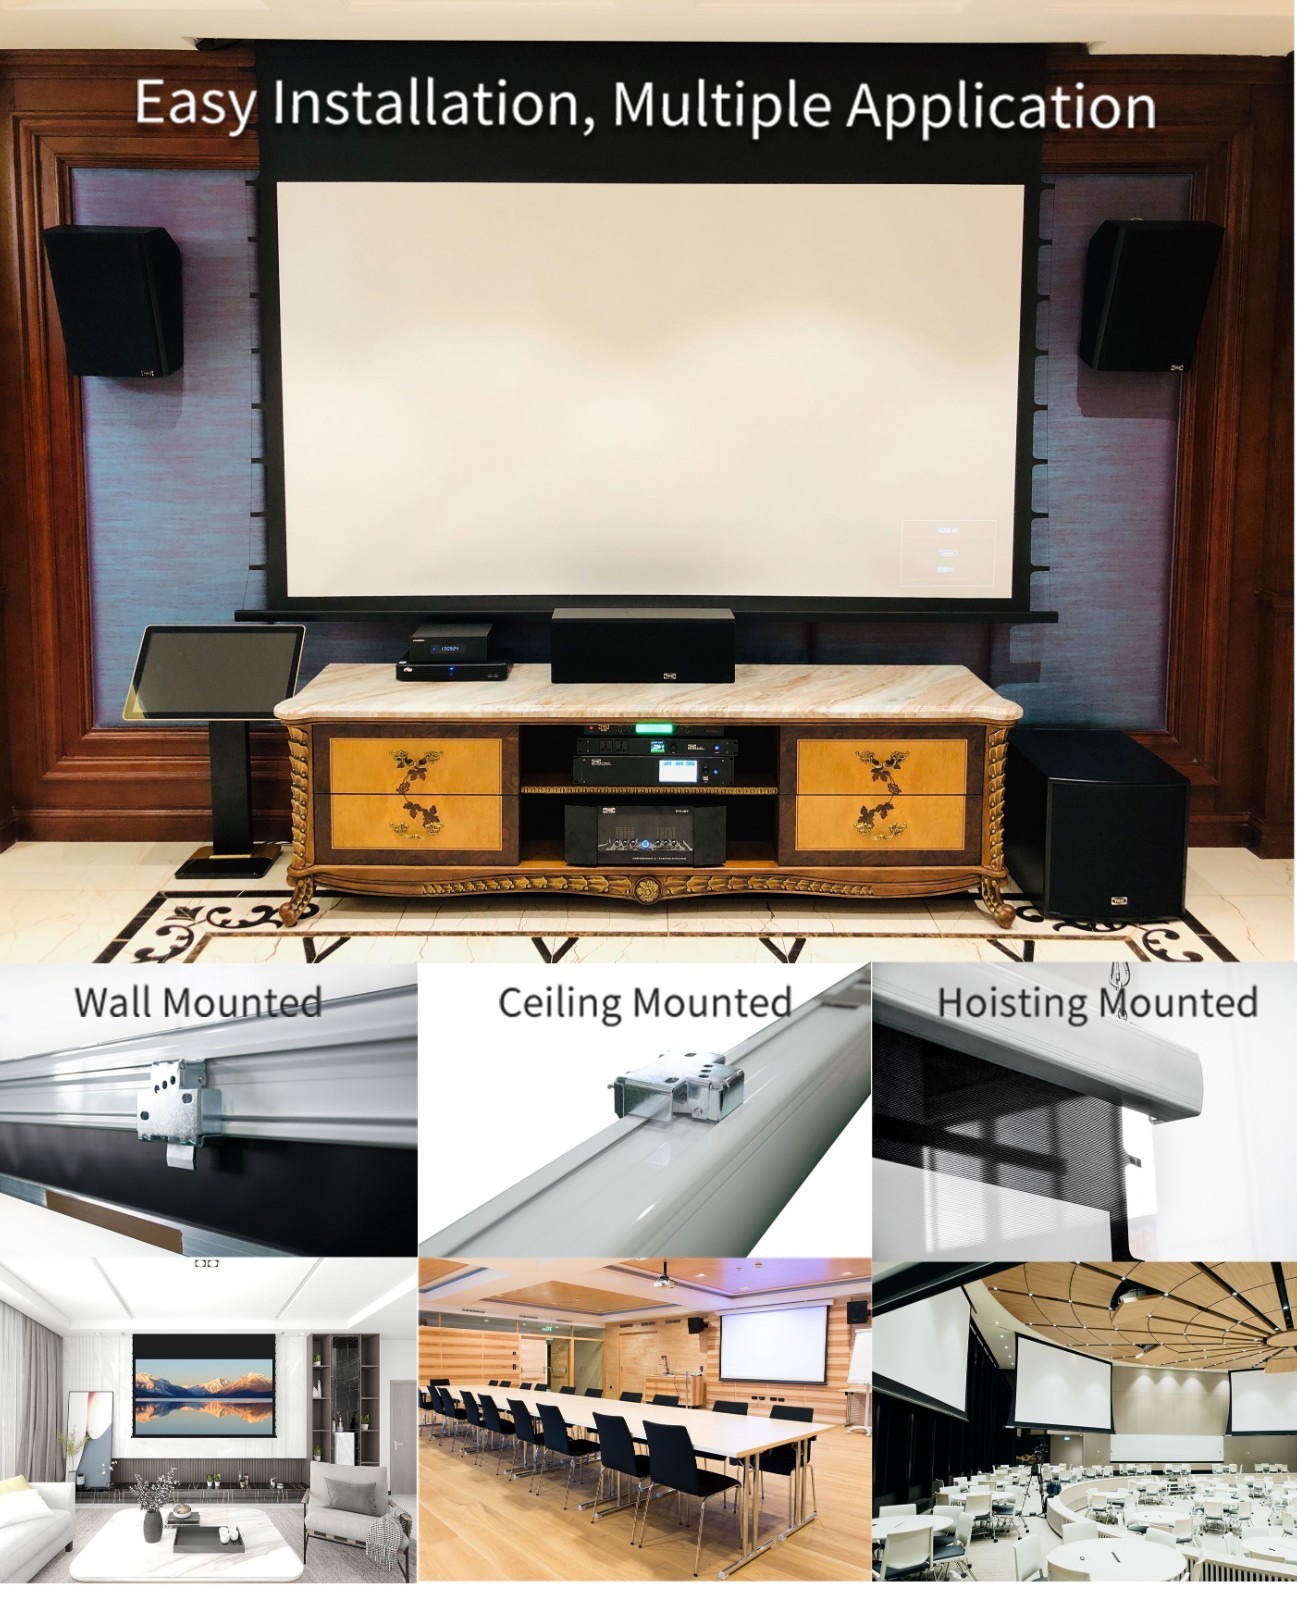 inceiling theater screen with good price for indoors